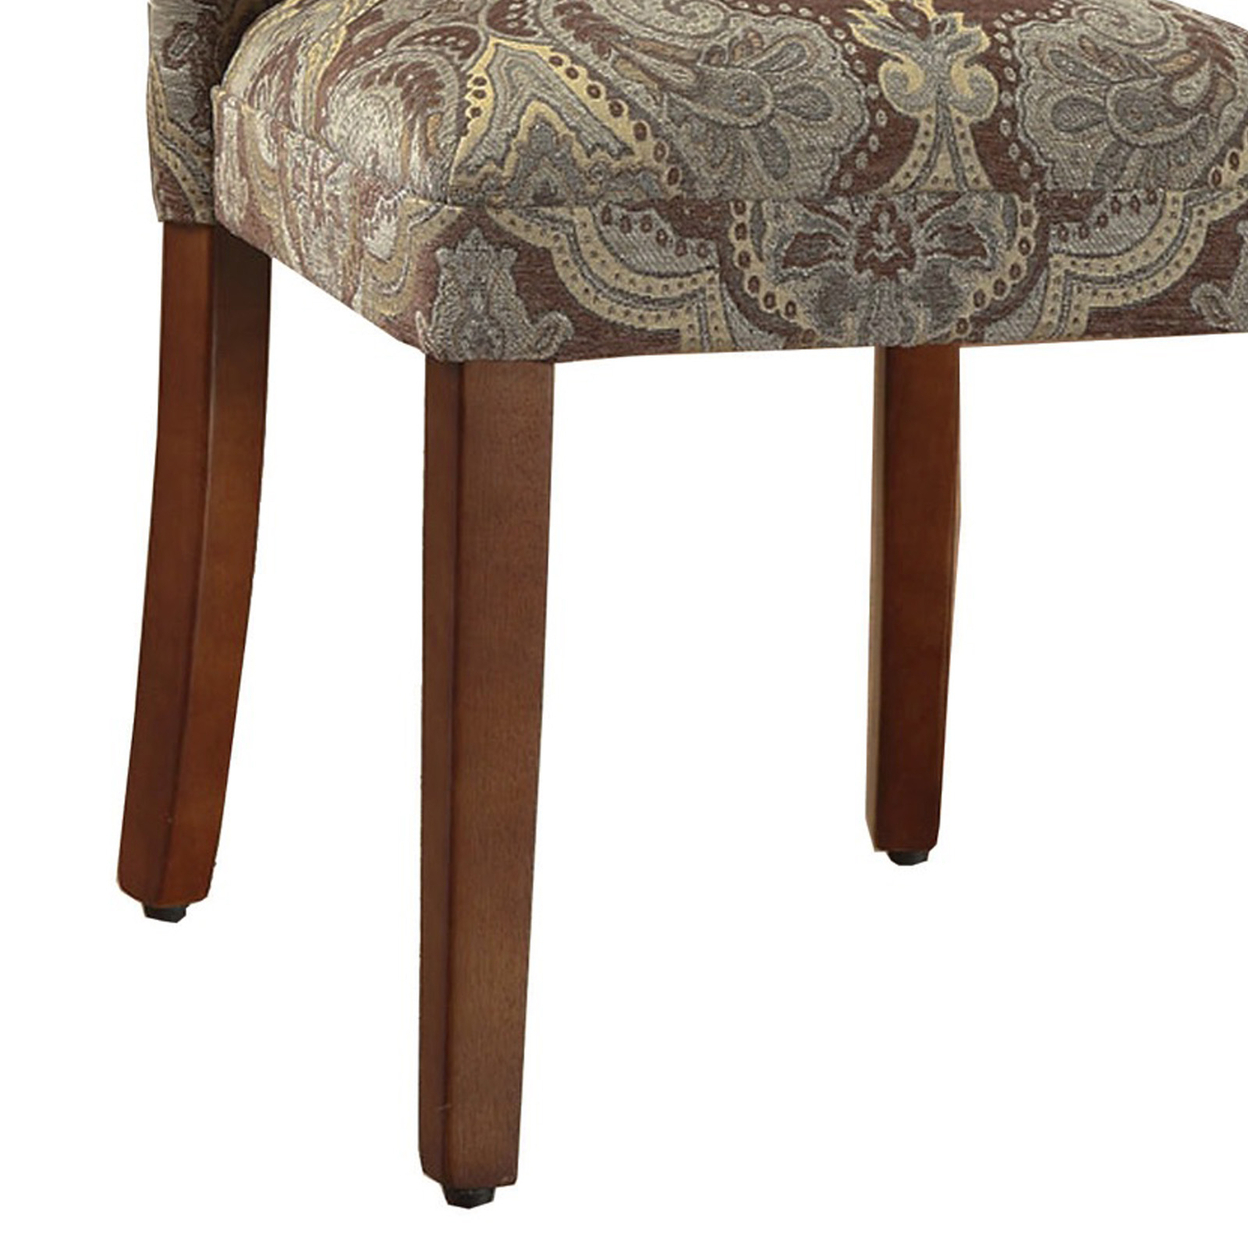 Fabric Upholstered Wooden Parson Chair With Paisley Print, Multicolor, Set Of Two- Saltoro Sherpi